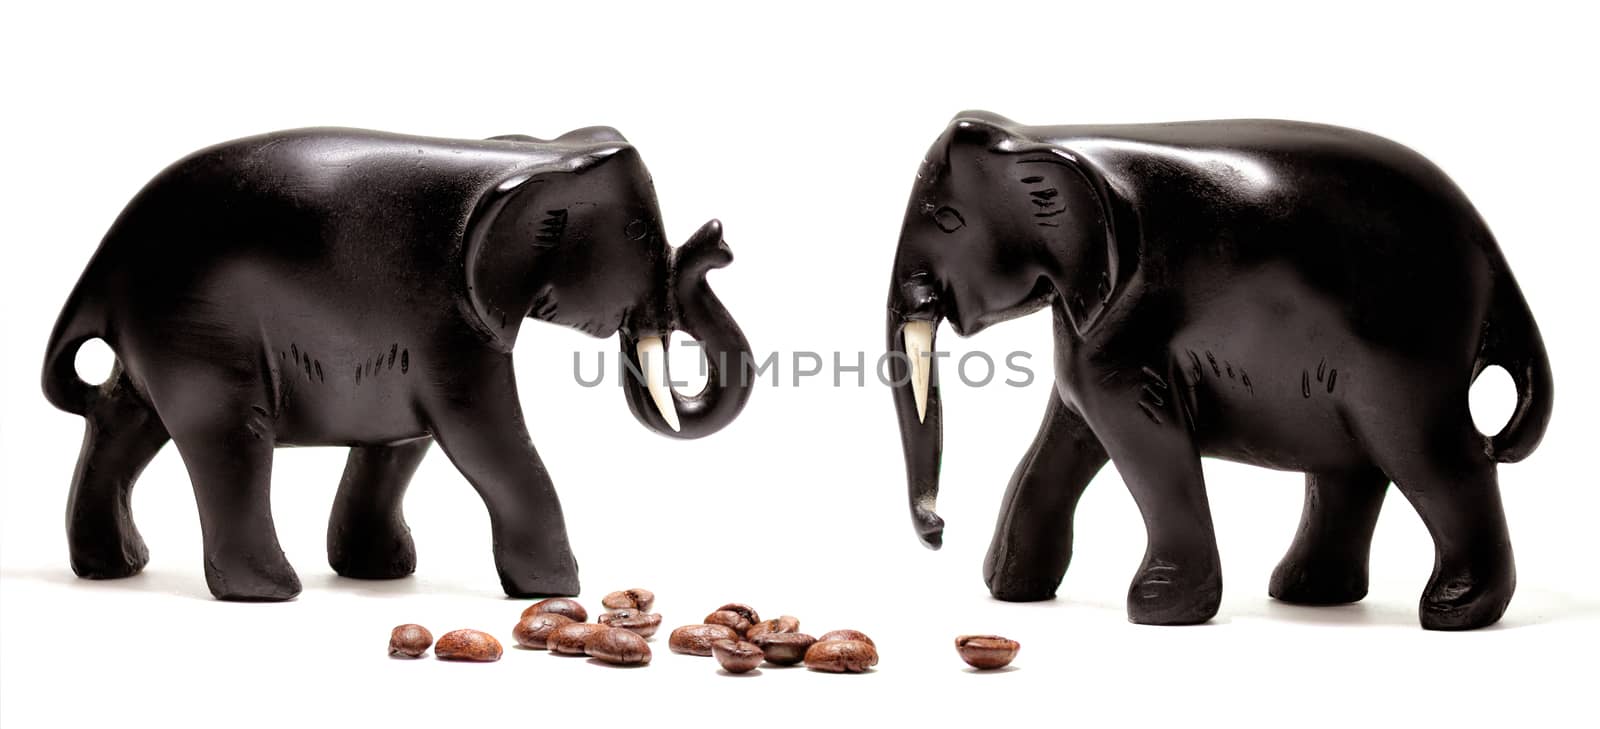 Two Black Elephants with Cofee Beans